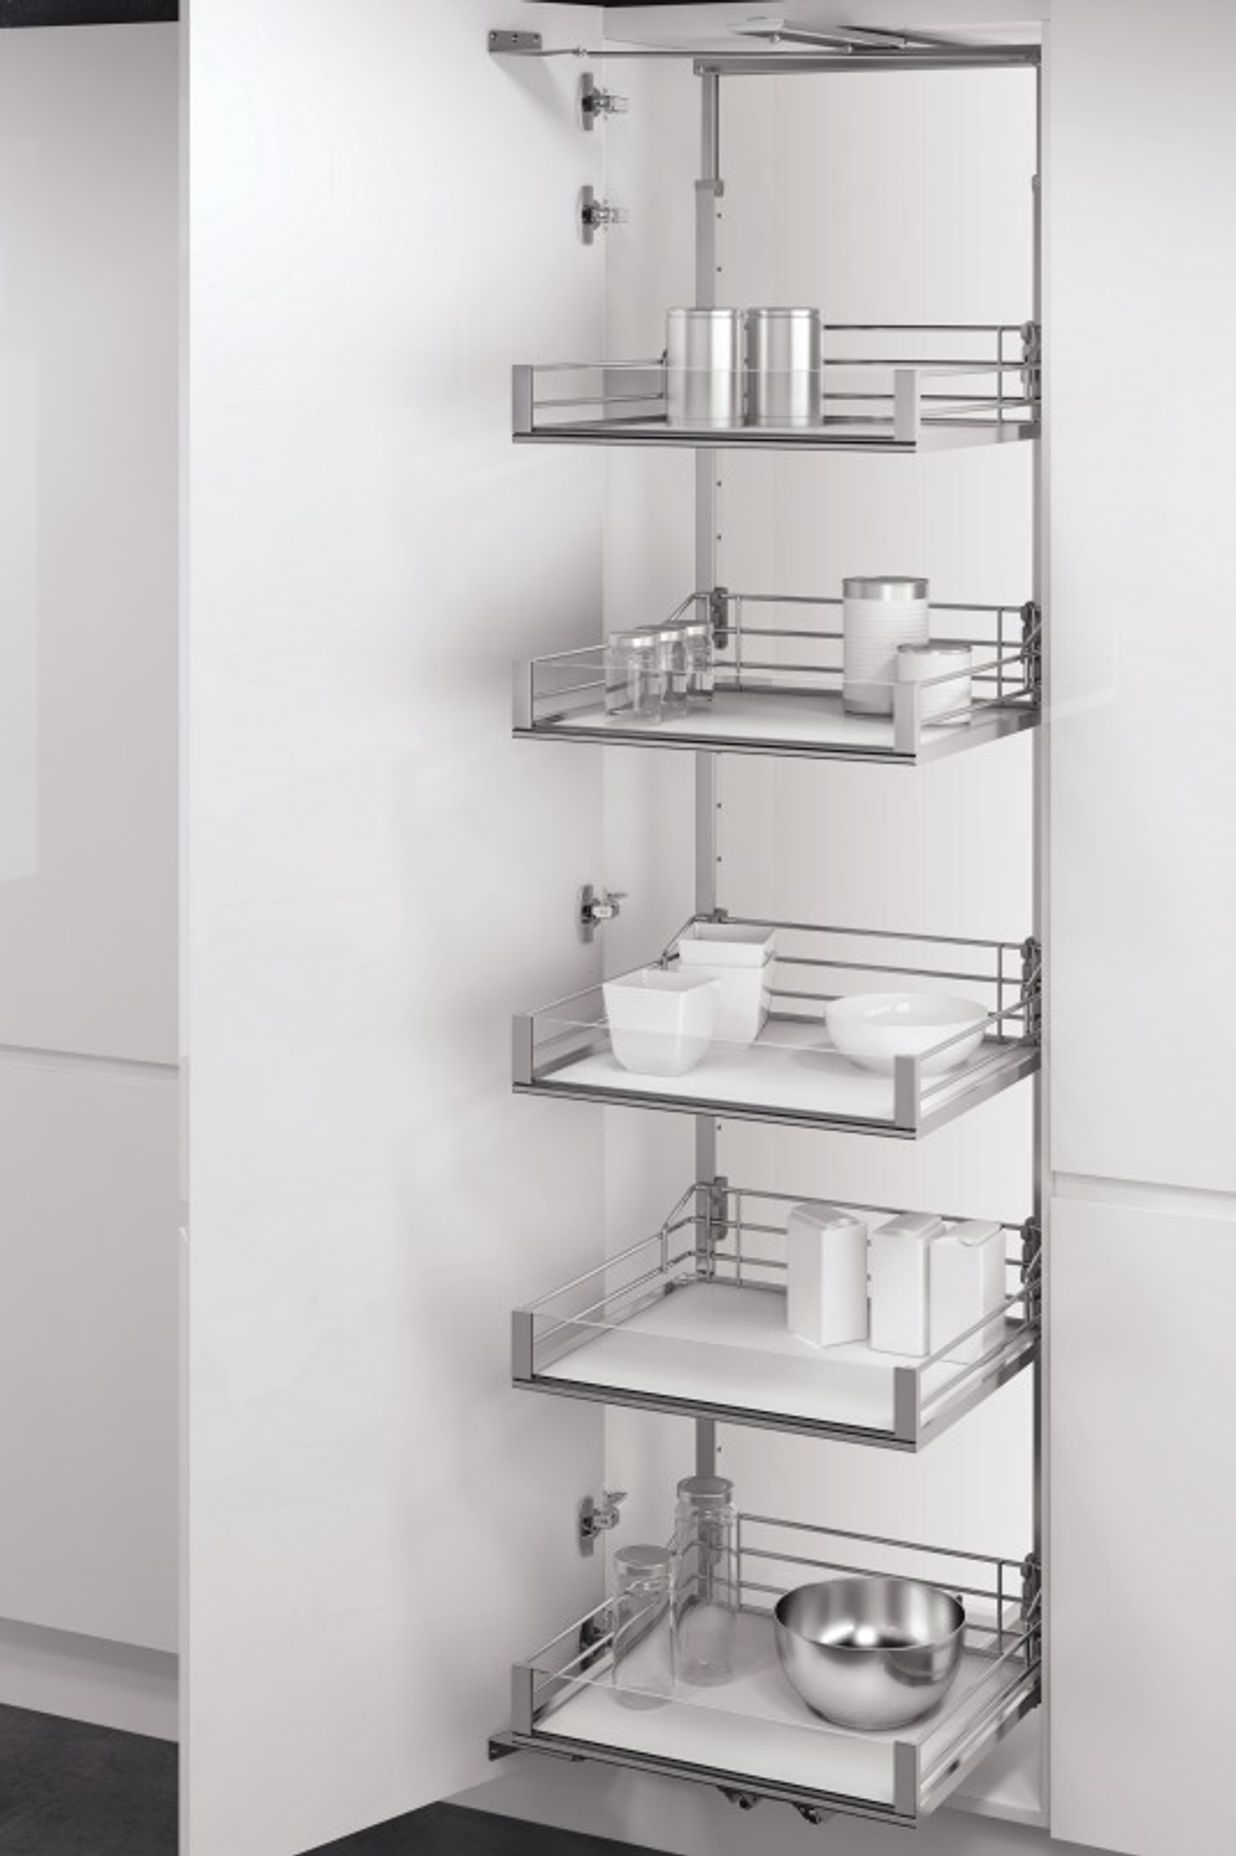 With glass sides the Premea Artline spec gives an unobstructed view into the shelf.